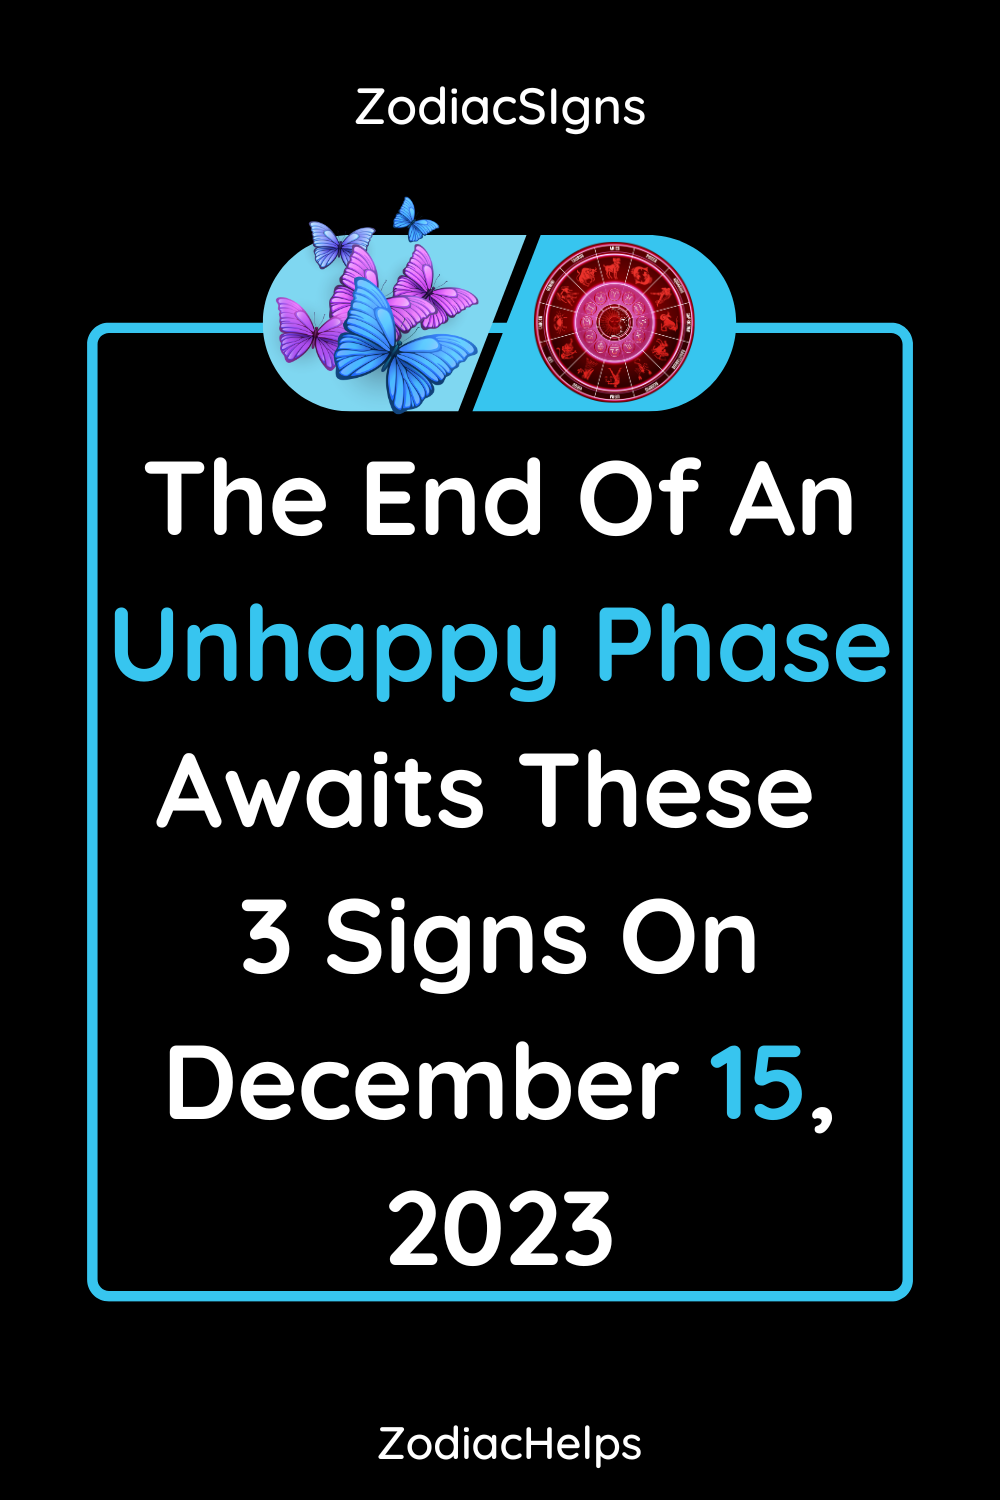 The End Of An Unhappy Phase Awaits These 3 Signs On December 15, 2023